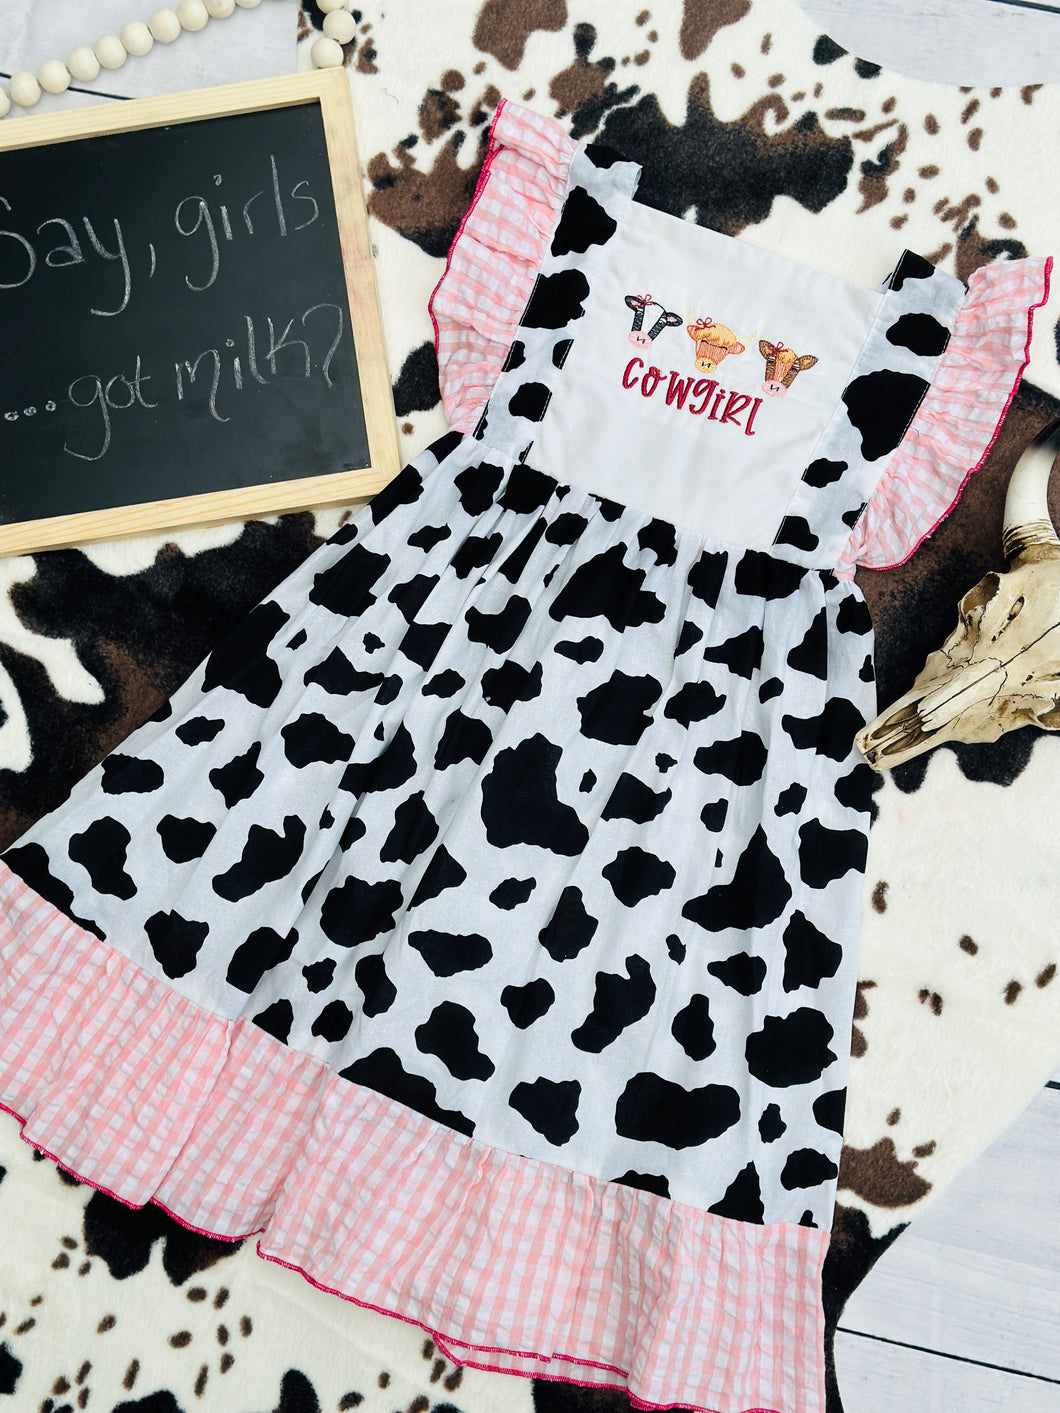 Cowgirl pinafore